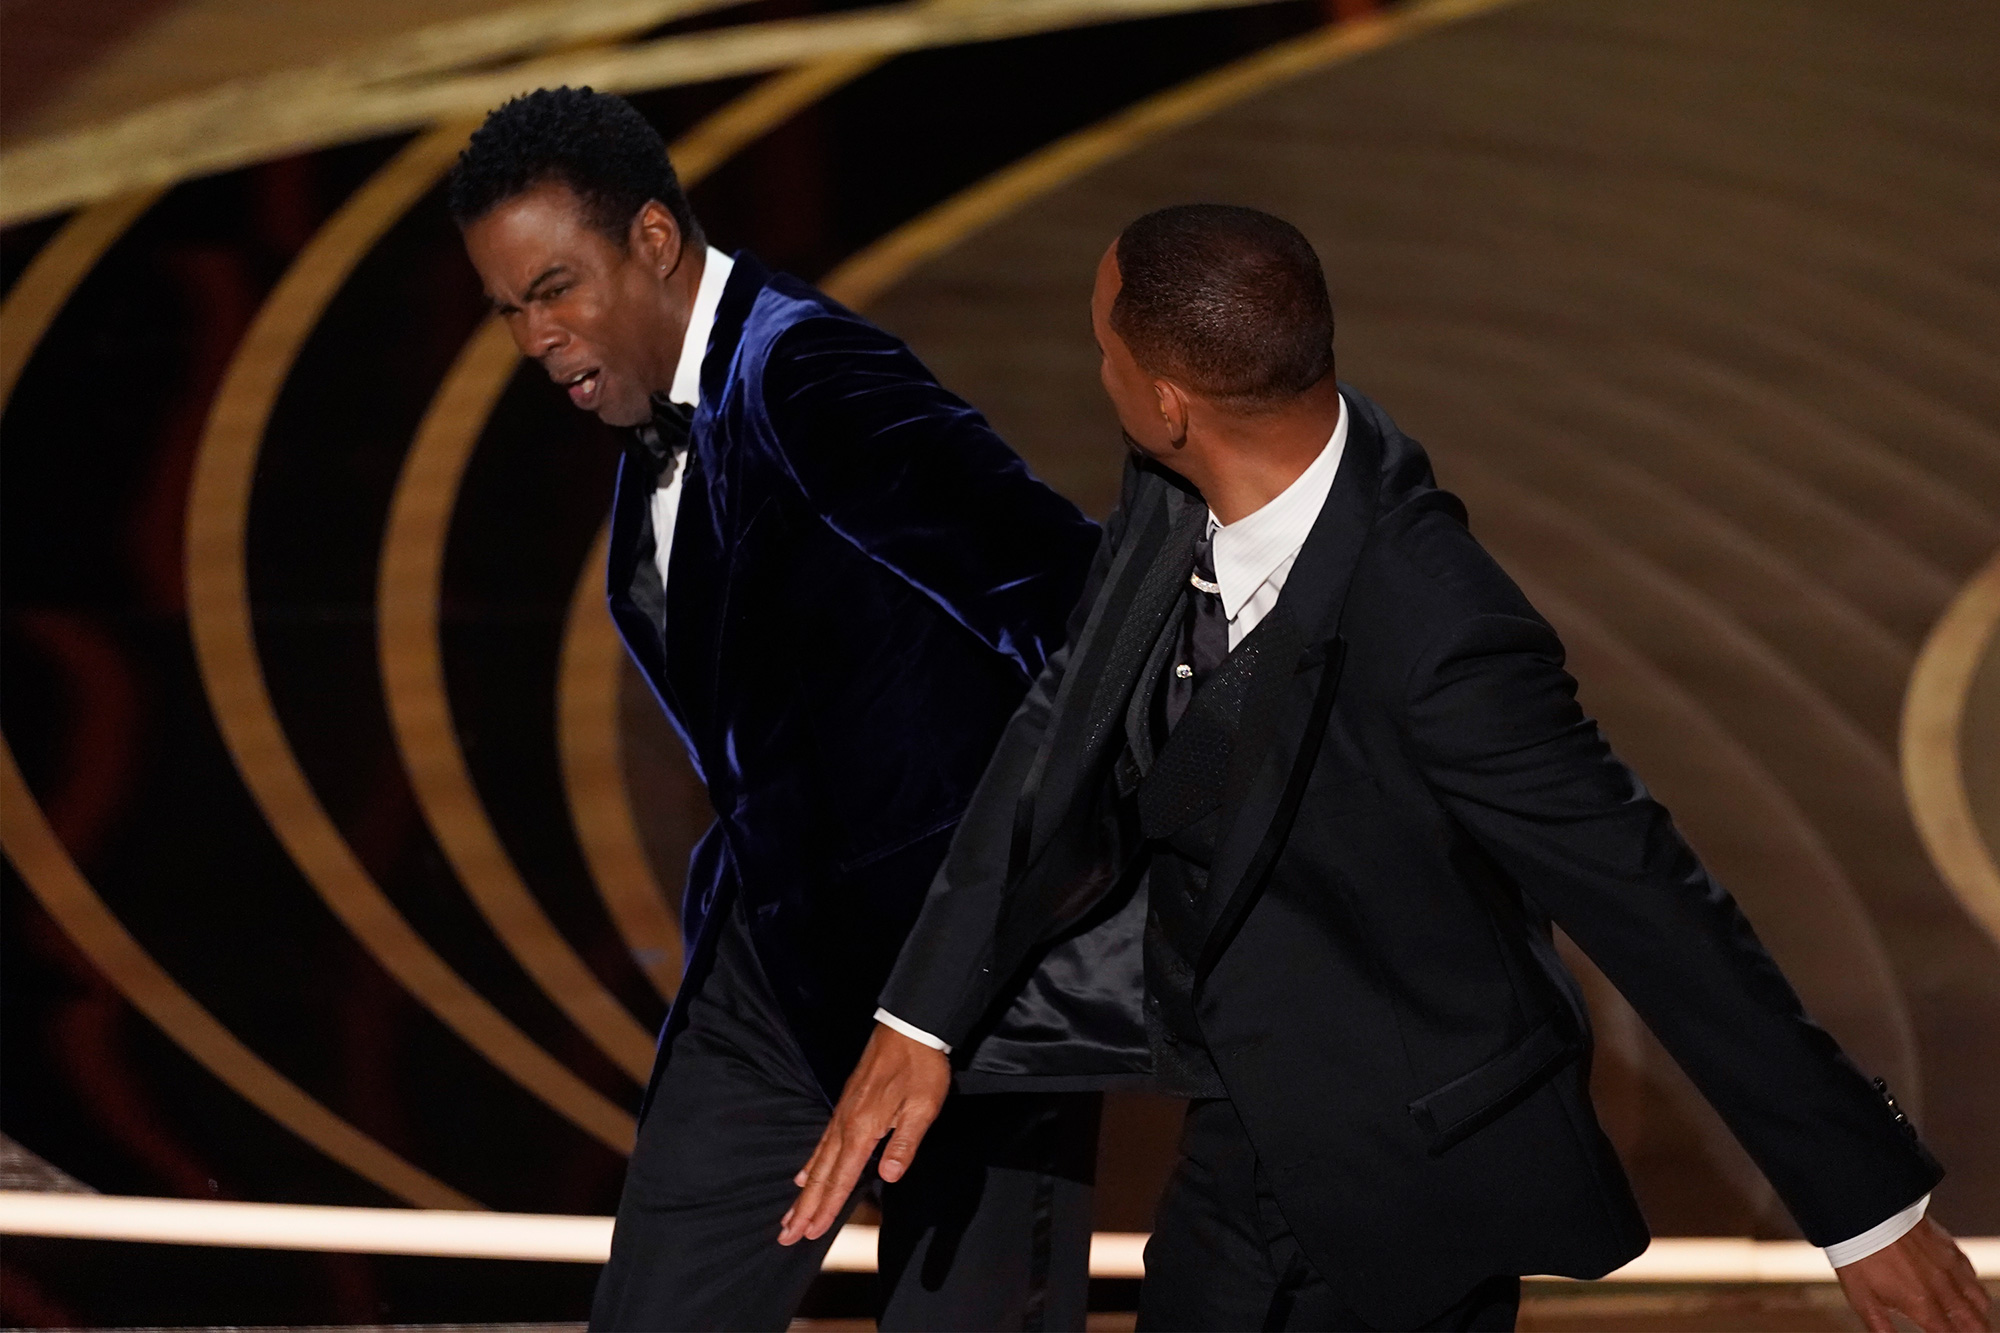 Chris Rock and Will Smith onstage at the 94th Academy Awards on Sunday March 27.